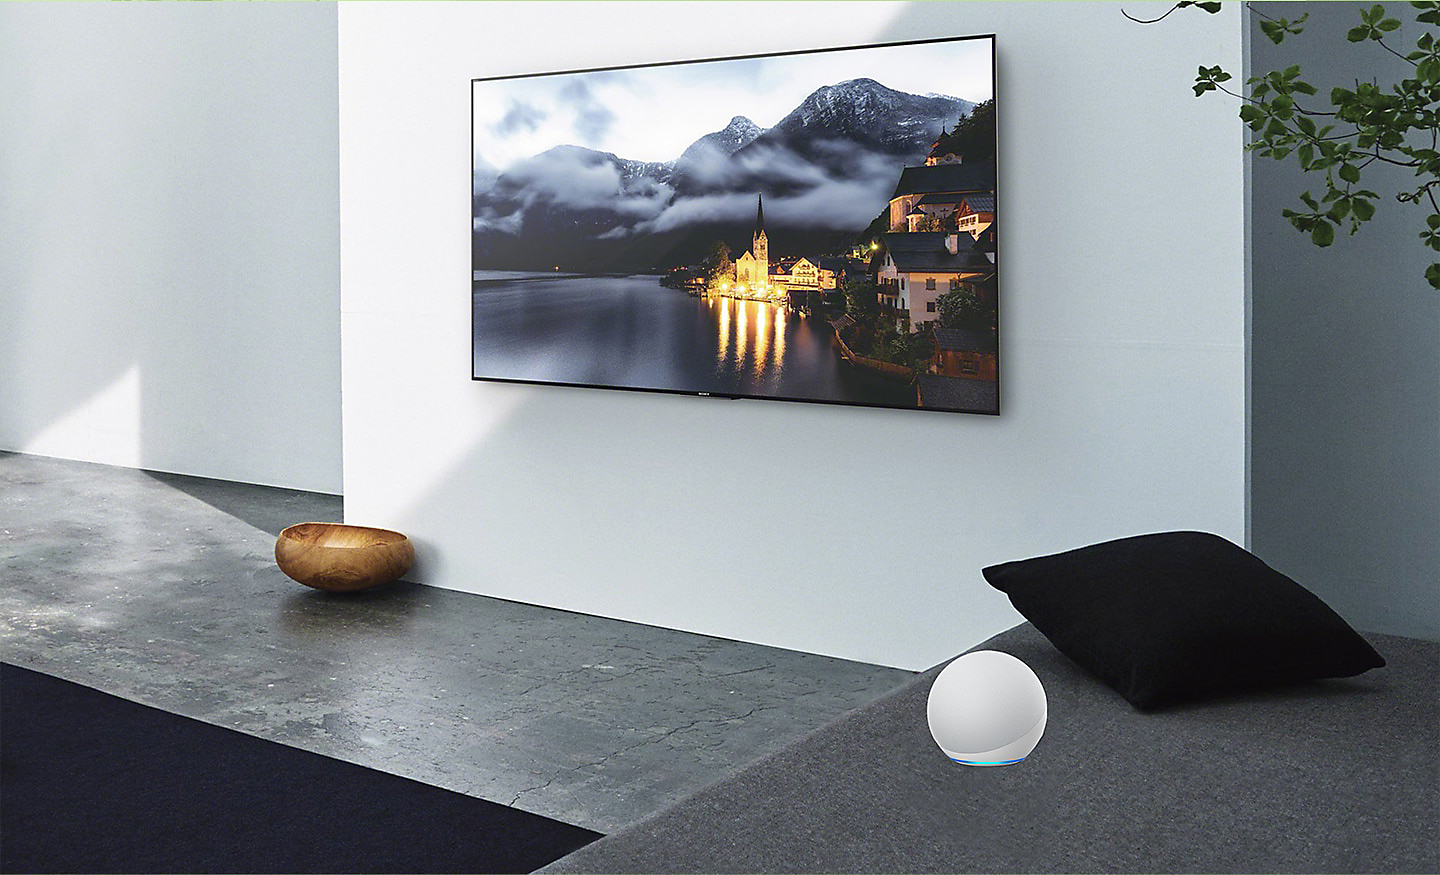 Living room scene showing a TV on the wall with an Alexa device to the side